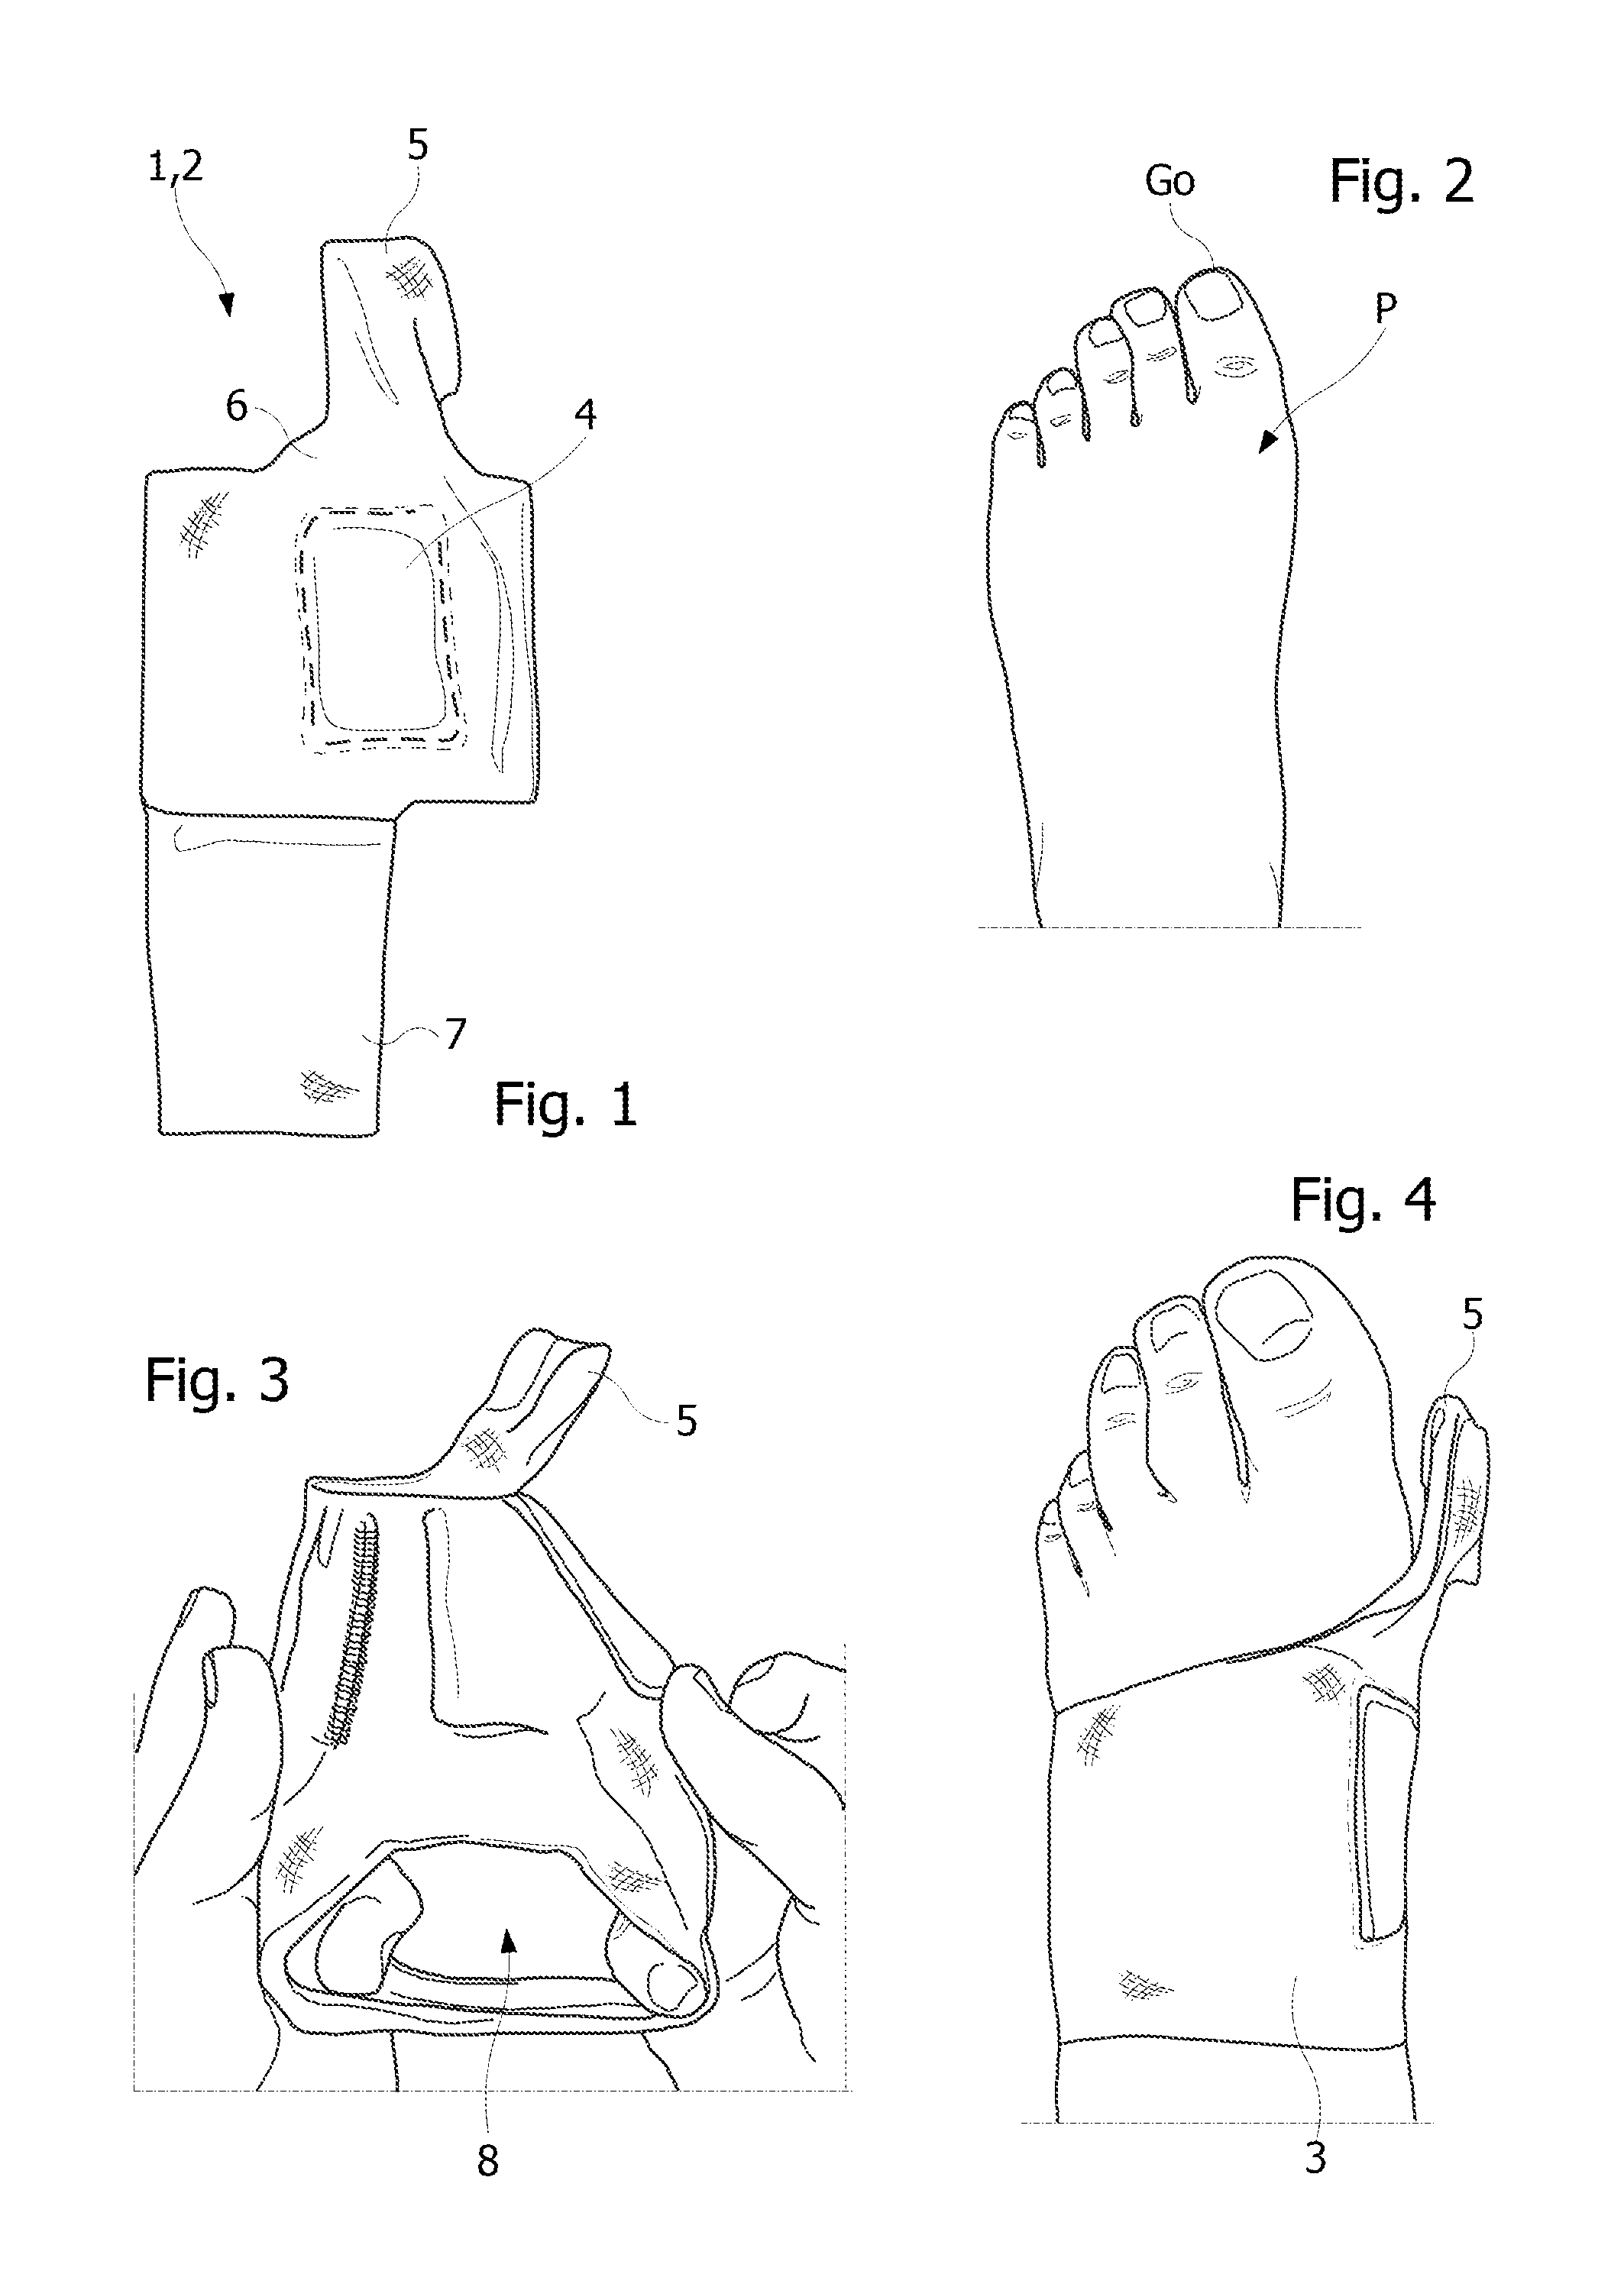 Orthopedic device for mechanical treatment of hallux valgus